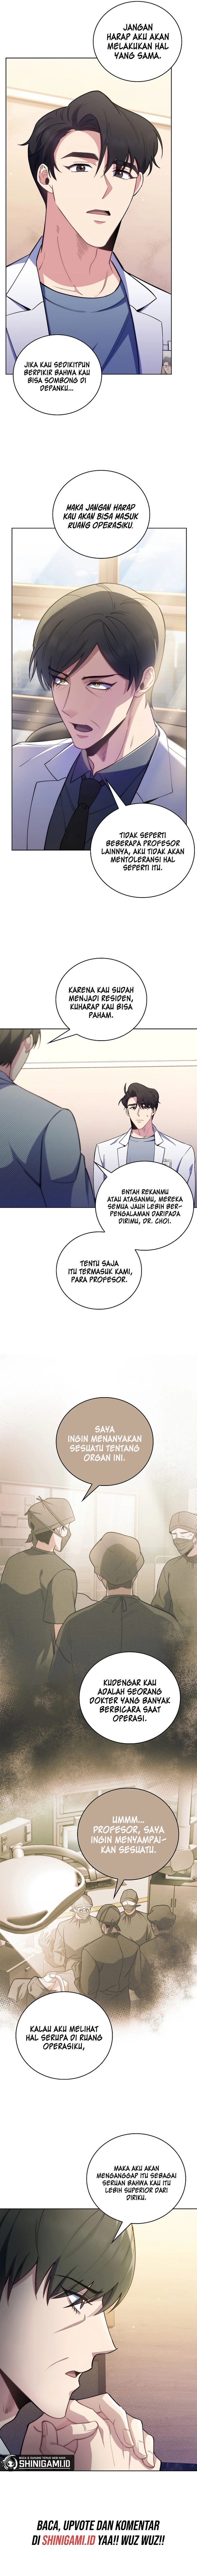 Level-up Doctor Chapter 55